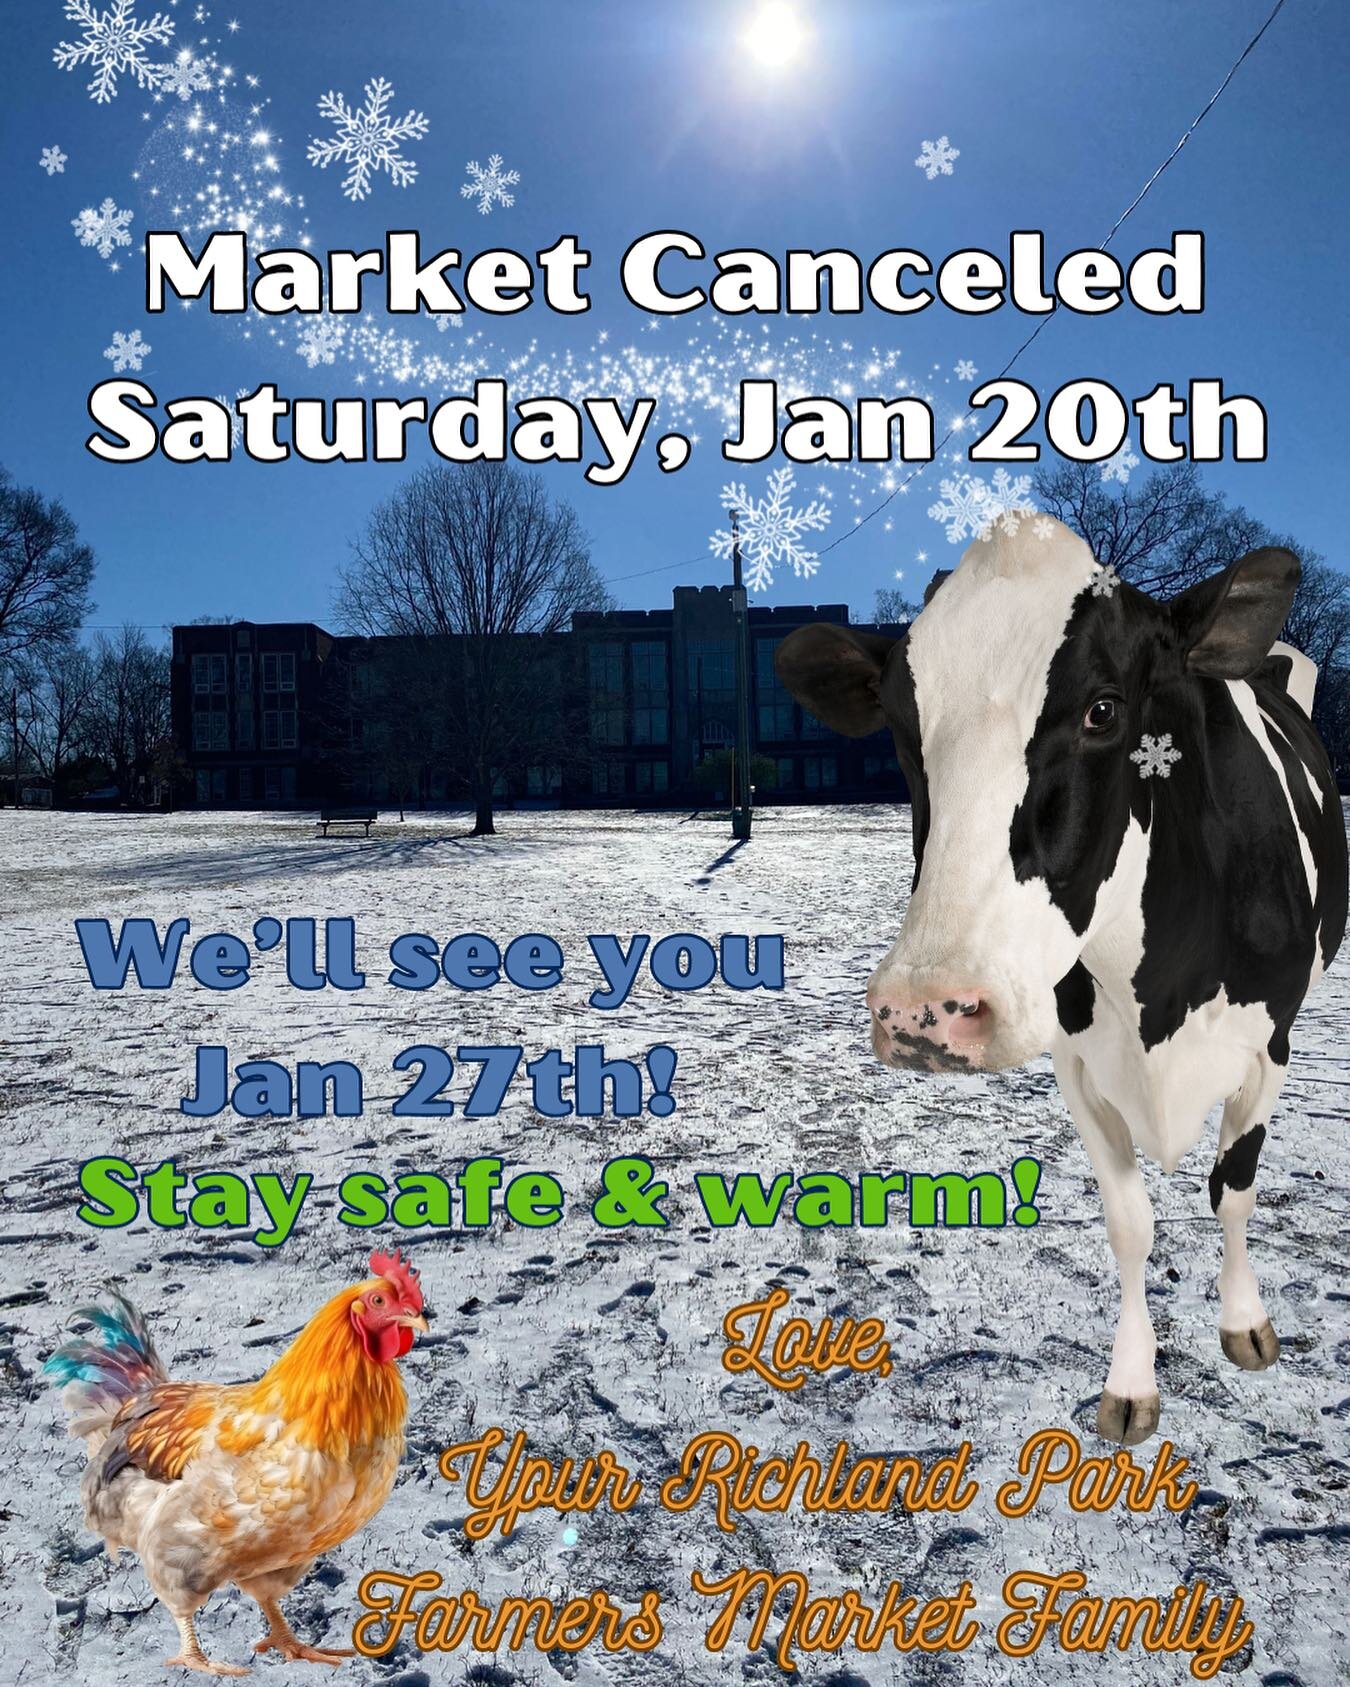 🚨We are CLOSED tomorrow, Saturday, Jan 20!
🪣We&rsquo;ve got lots of extra chores and tending to keep everything and everyone safe and warm.🧣
🌳 And we&rsquo;ve got to be easy on the park grounds💚
❄️We&rsquo;ll see next Saturday, Jan 27th for a go